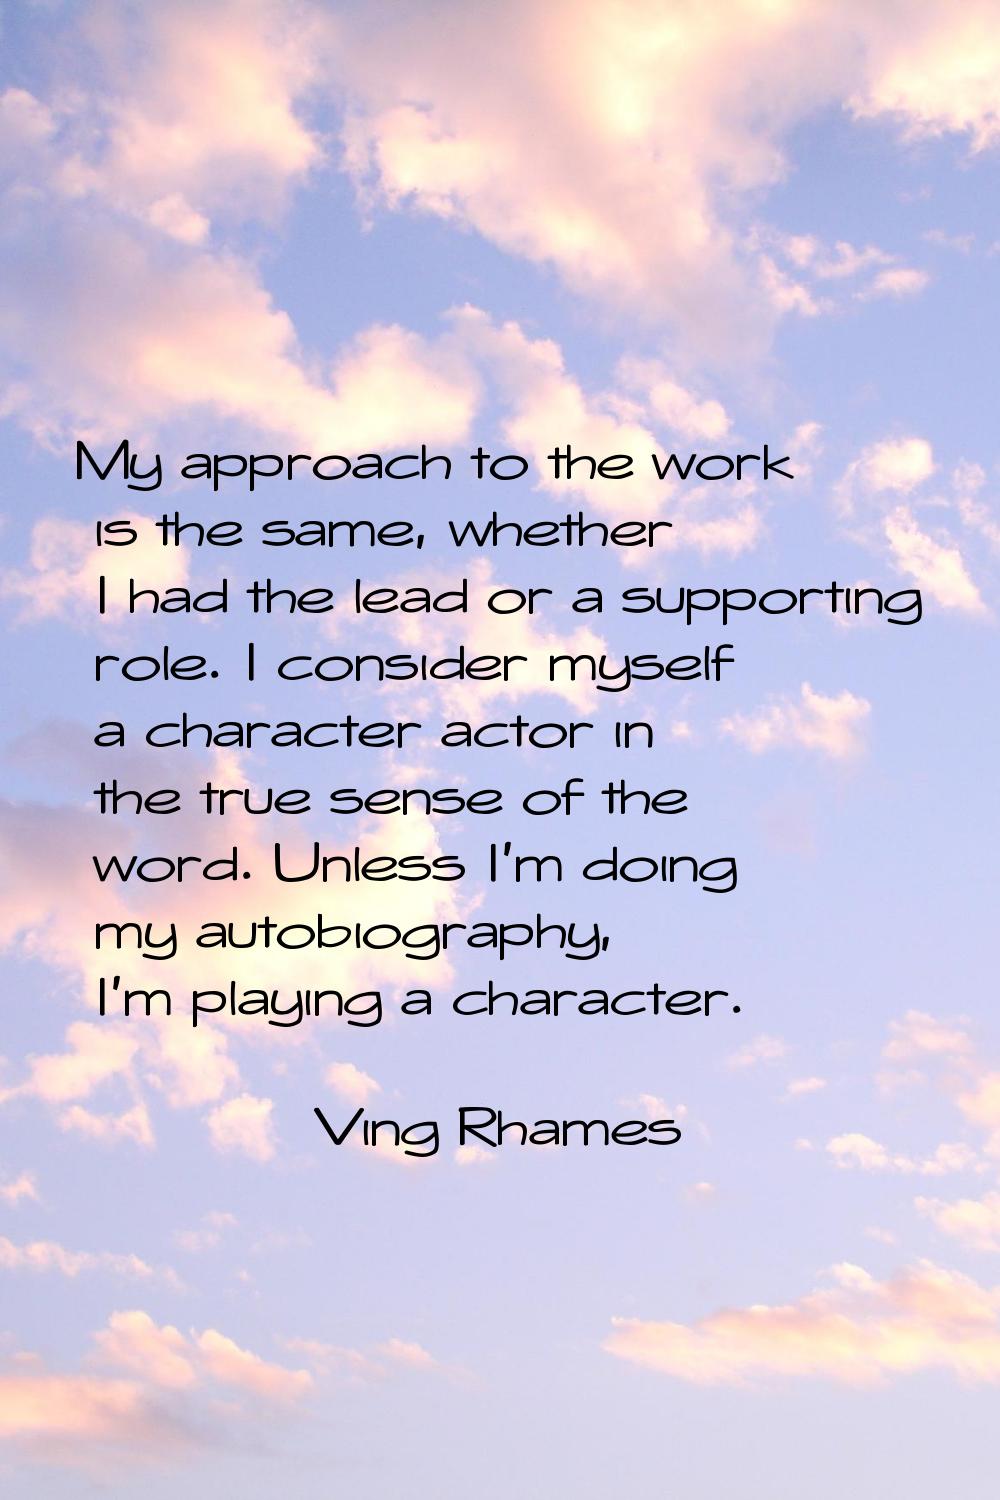 My approach to the work is the same, whether I had the lead or a supporting role. I consider myself